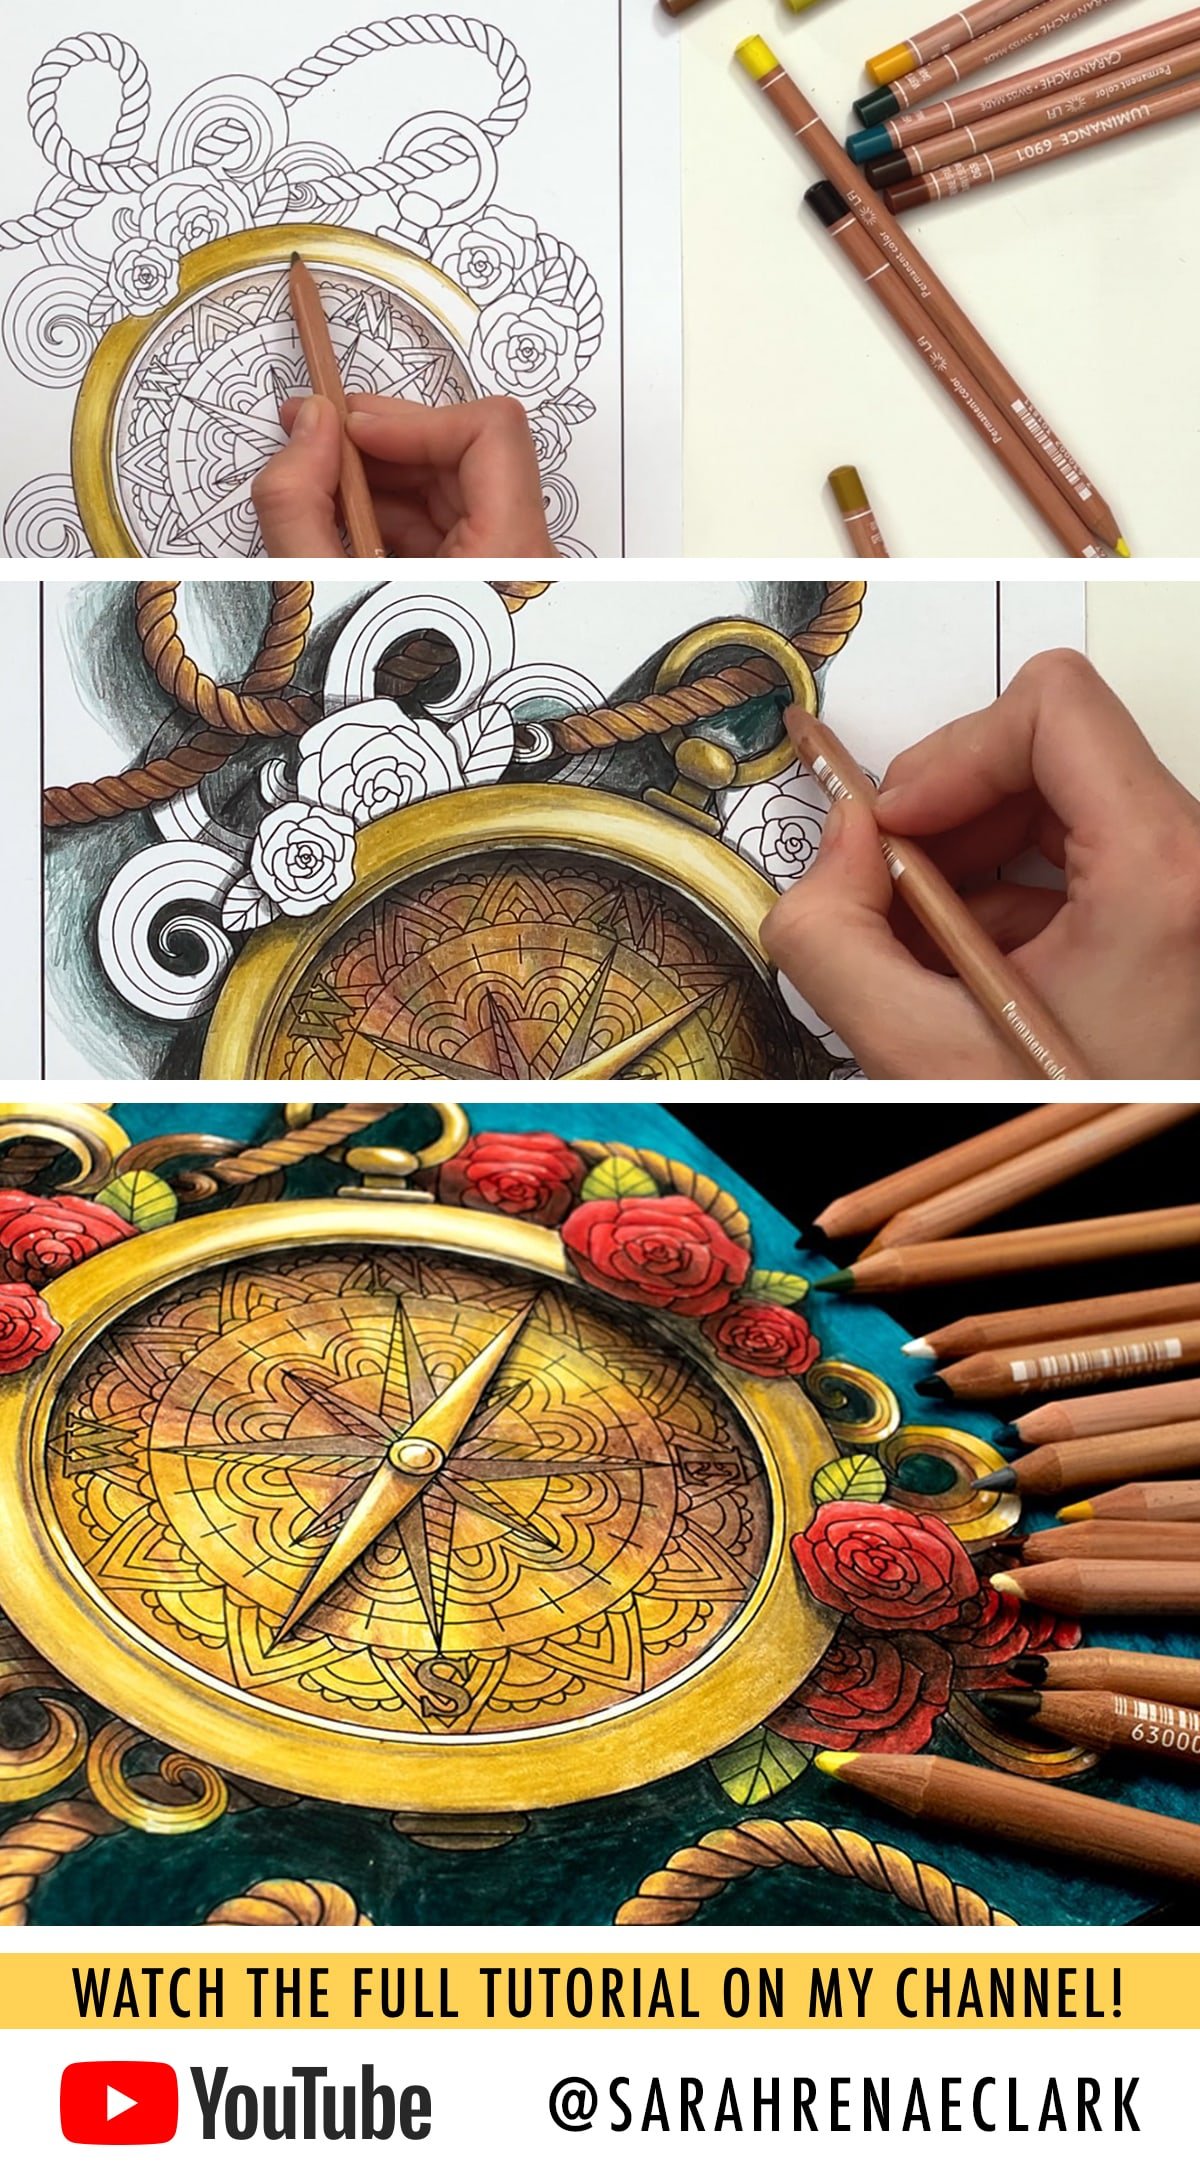 Advanced Shading Tutorial for Adult Coloring Books